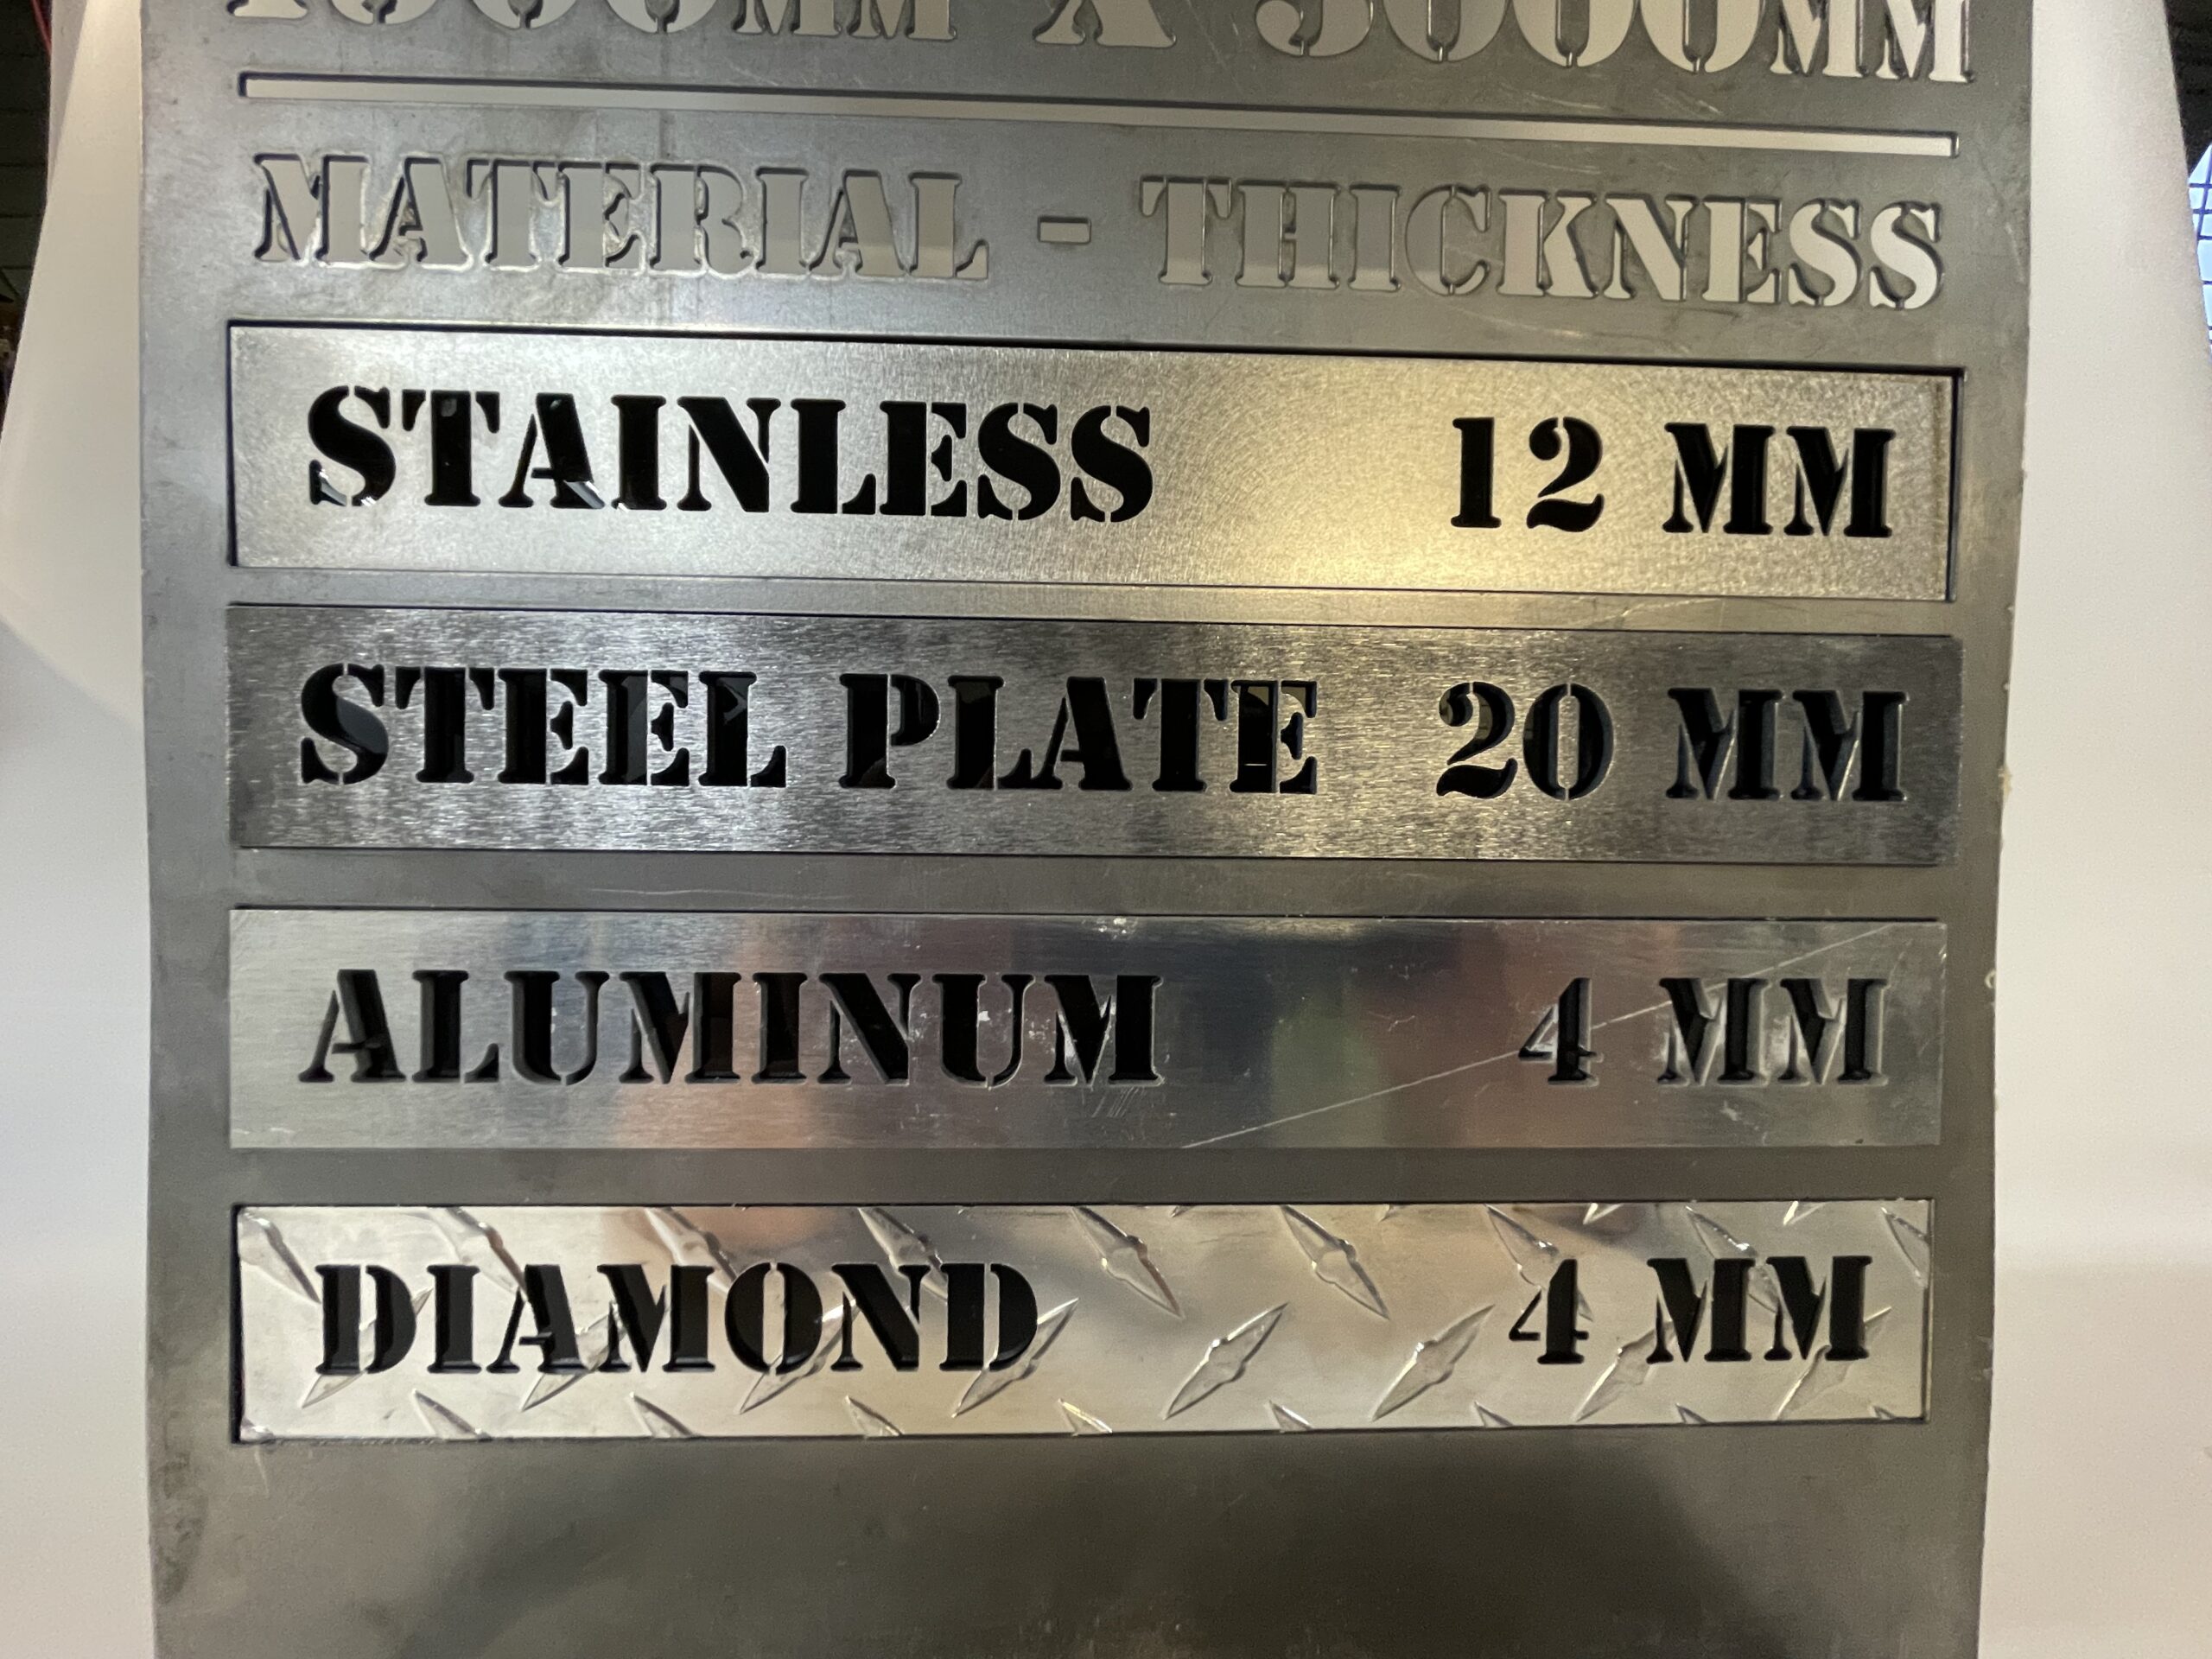 Engraved Metal Labels: laser cut sign with cut-out lettering listing different maximum material thicknesses for various metals. Stainless is 12 millimeters, Steel Plate is 20 millimeters, Aluminum is 4 millimeters, and Diamond is 4 millimeters.